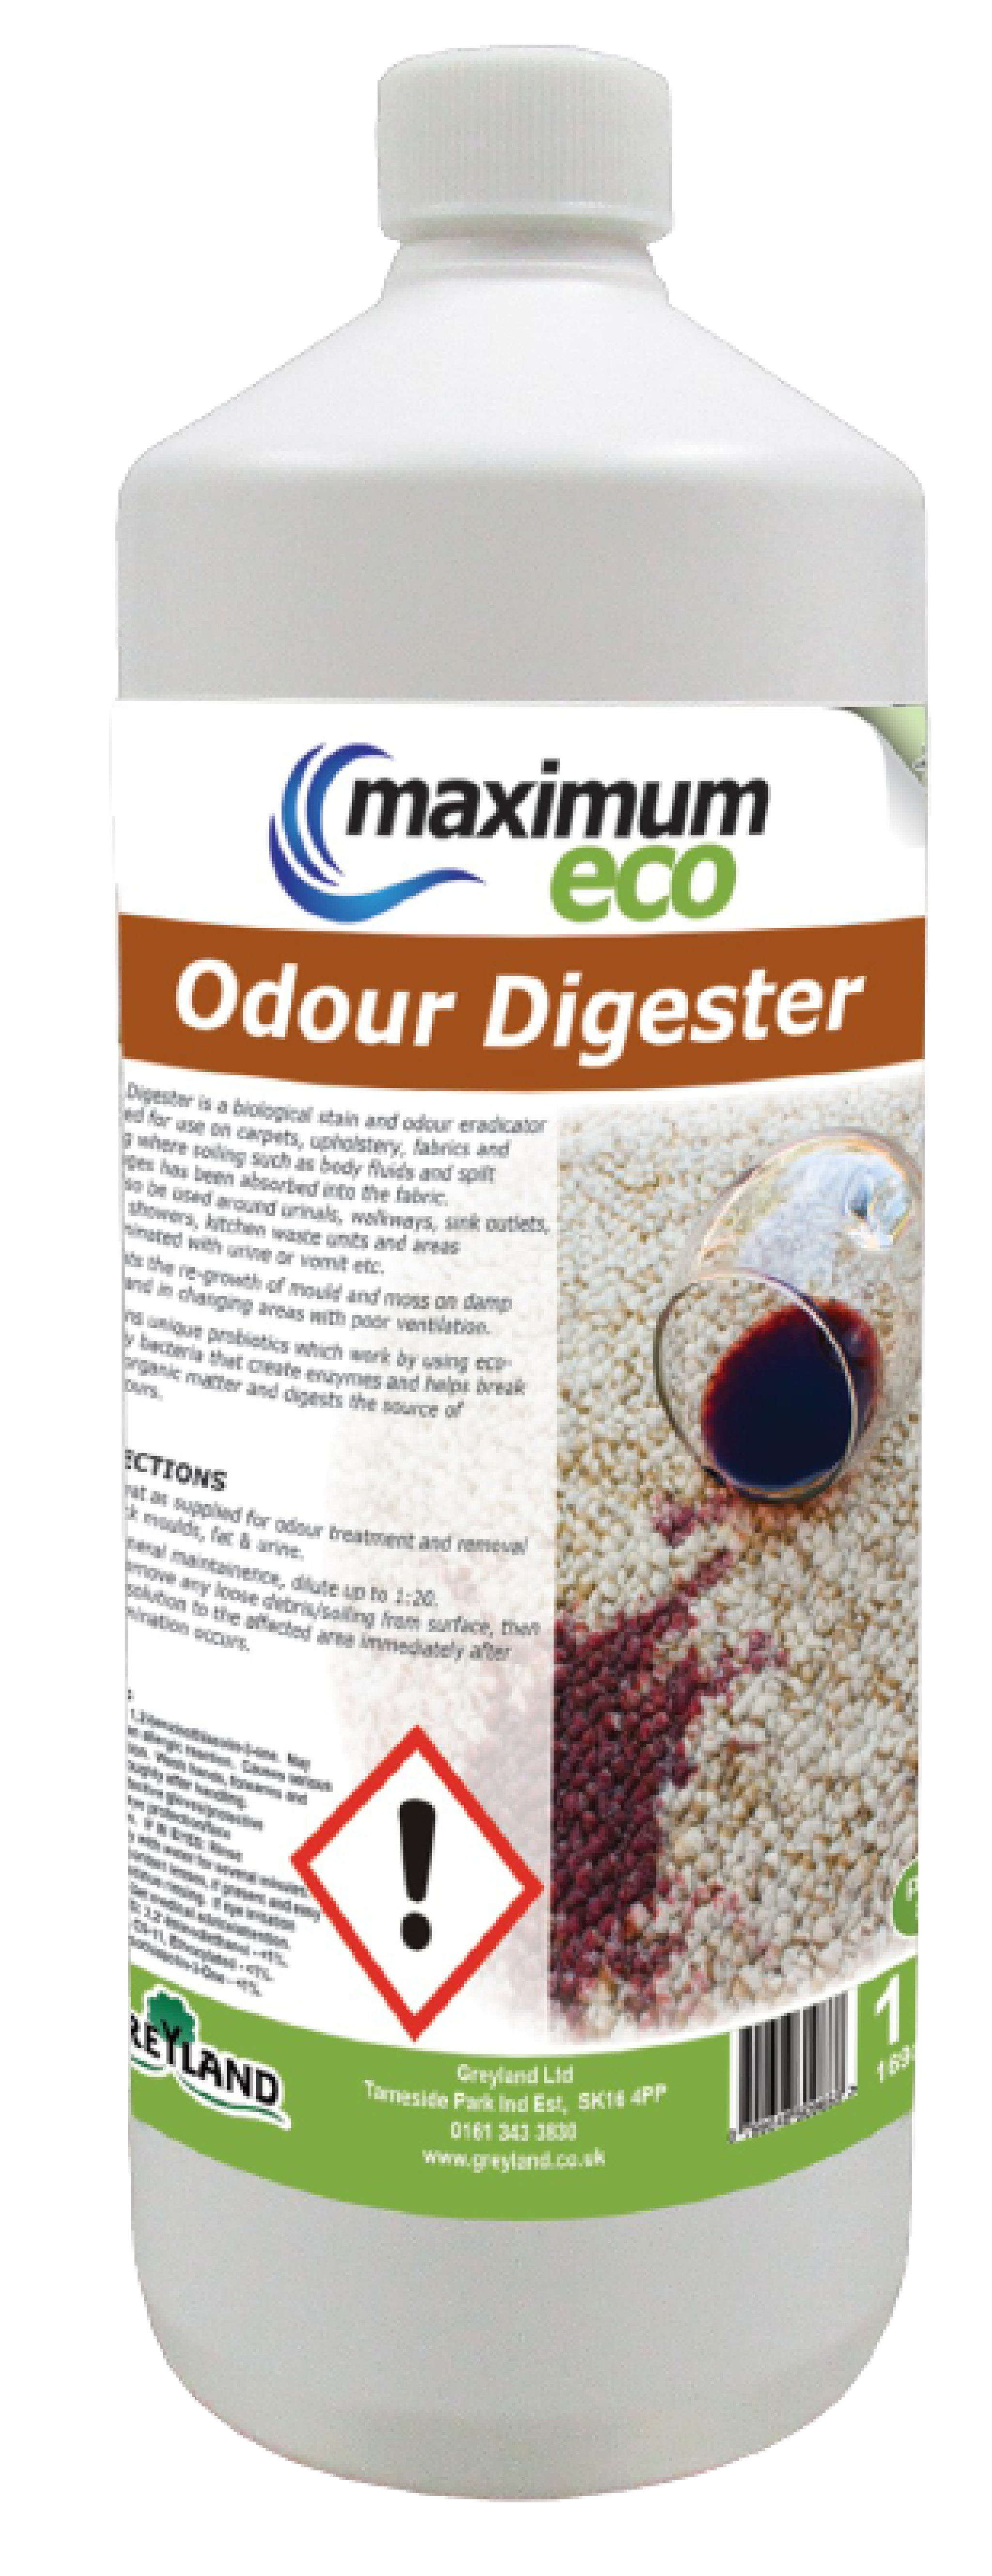 Odour_Digester_1ltr-removebg-preview.png